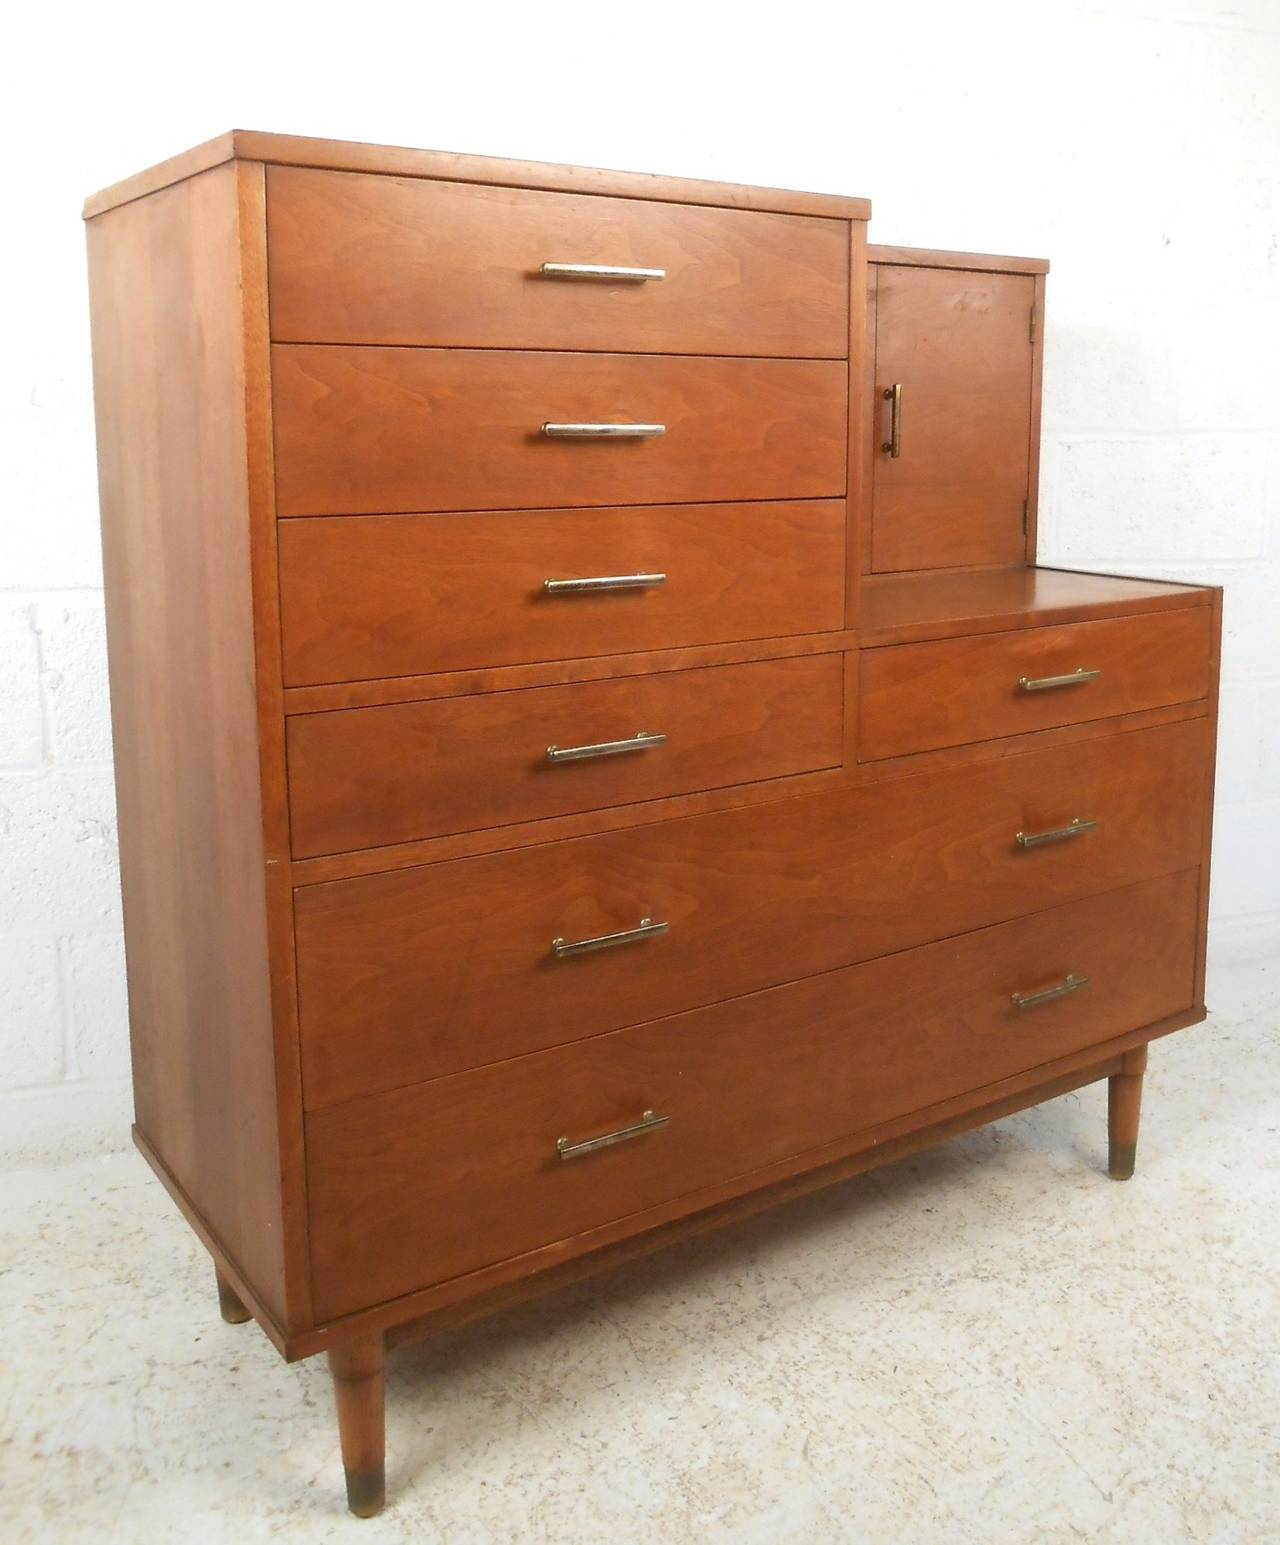 Tall Mid Century Bedroom Dresser With Vanity By Drexel At 1stdibs